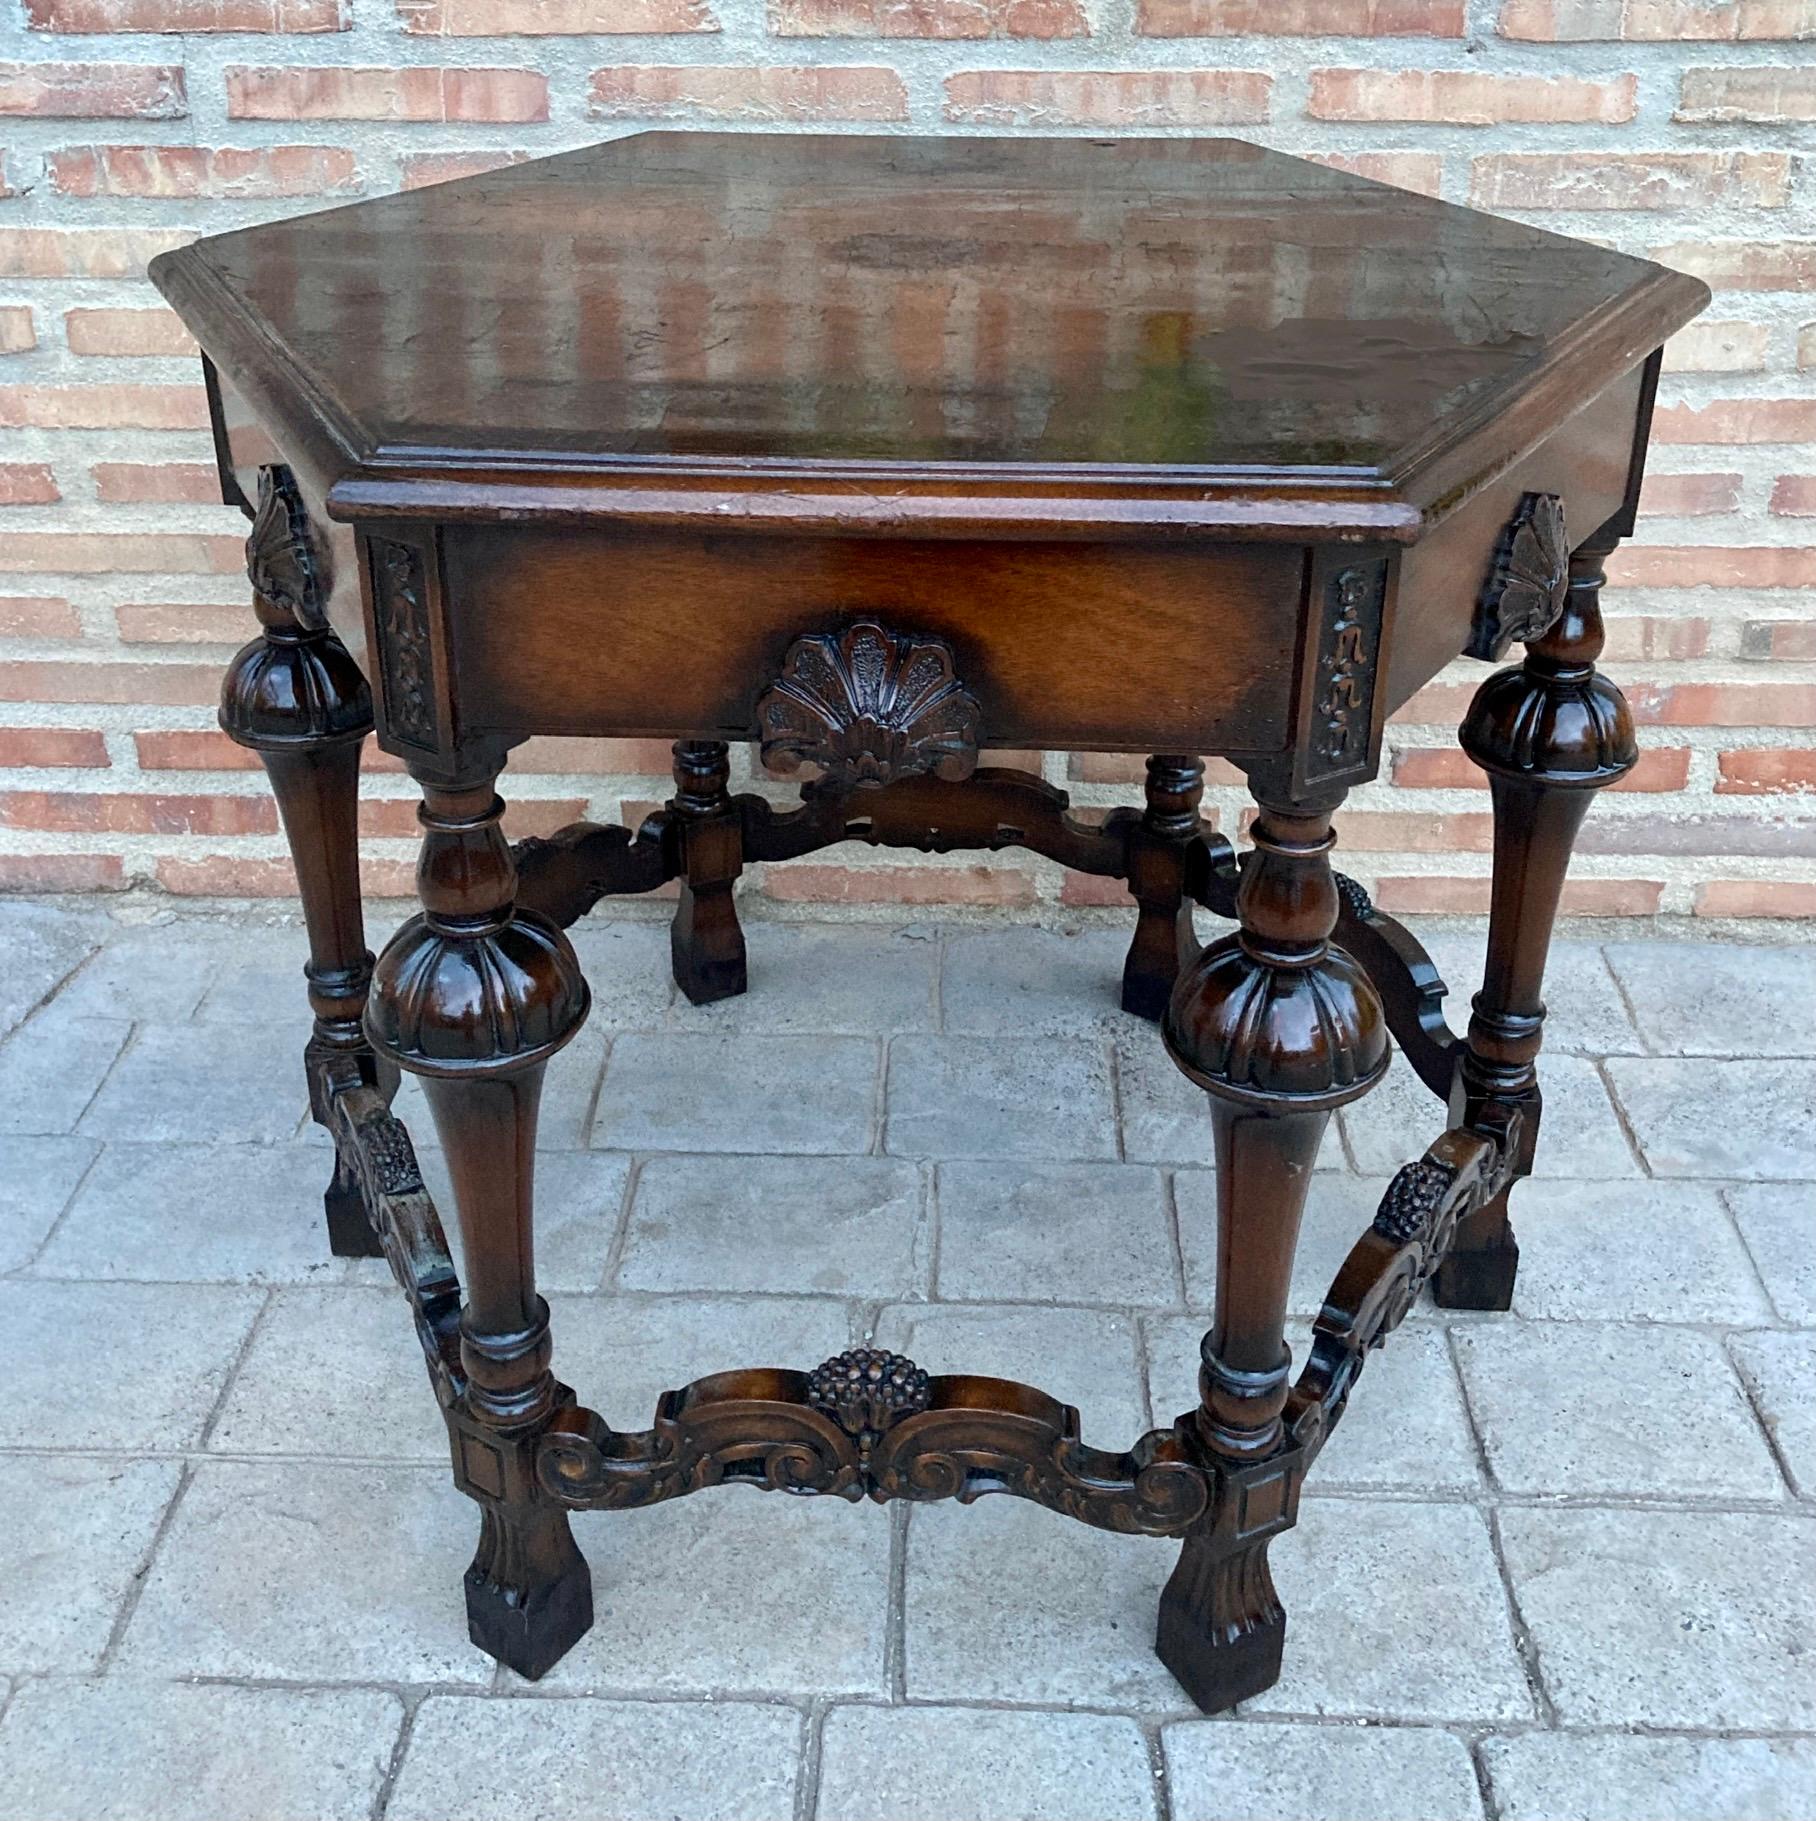 Vintage Design
Hexagonal side table in original late 19th century Renaissance style. Made of walnut.
It is good as a coffee table or side table.